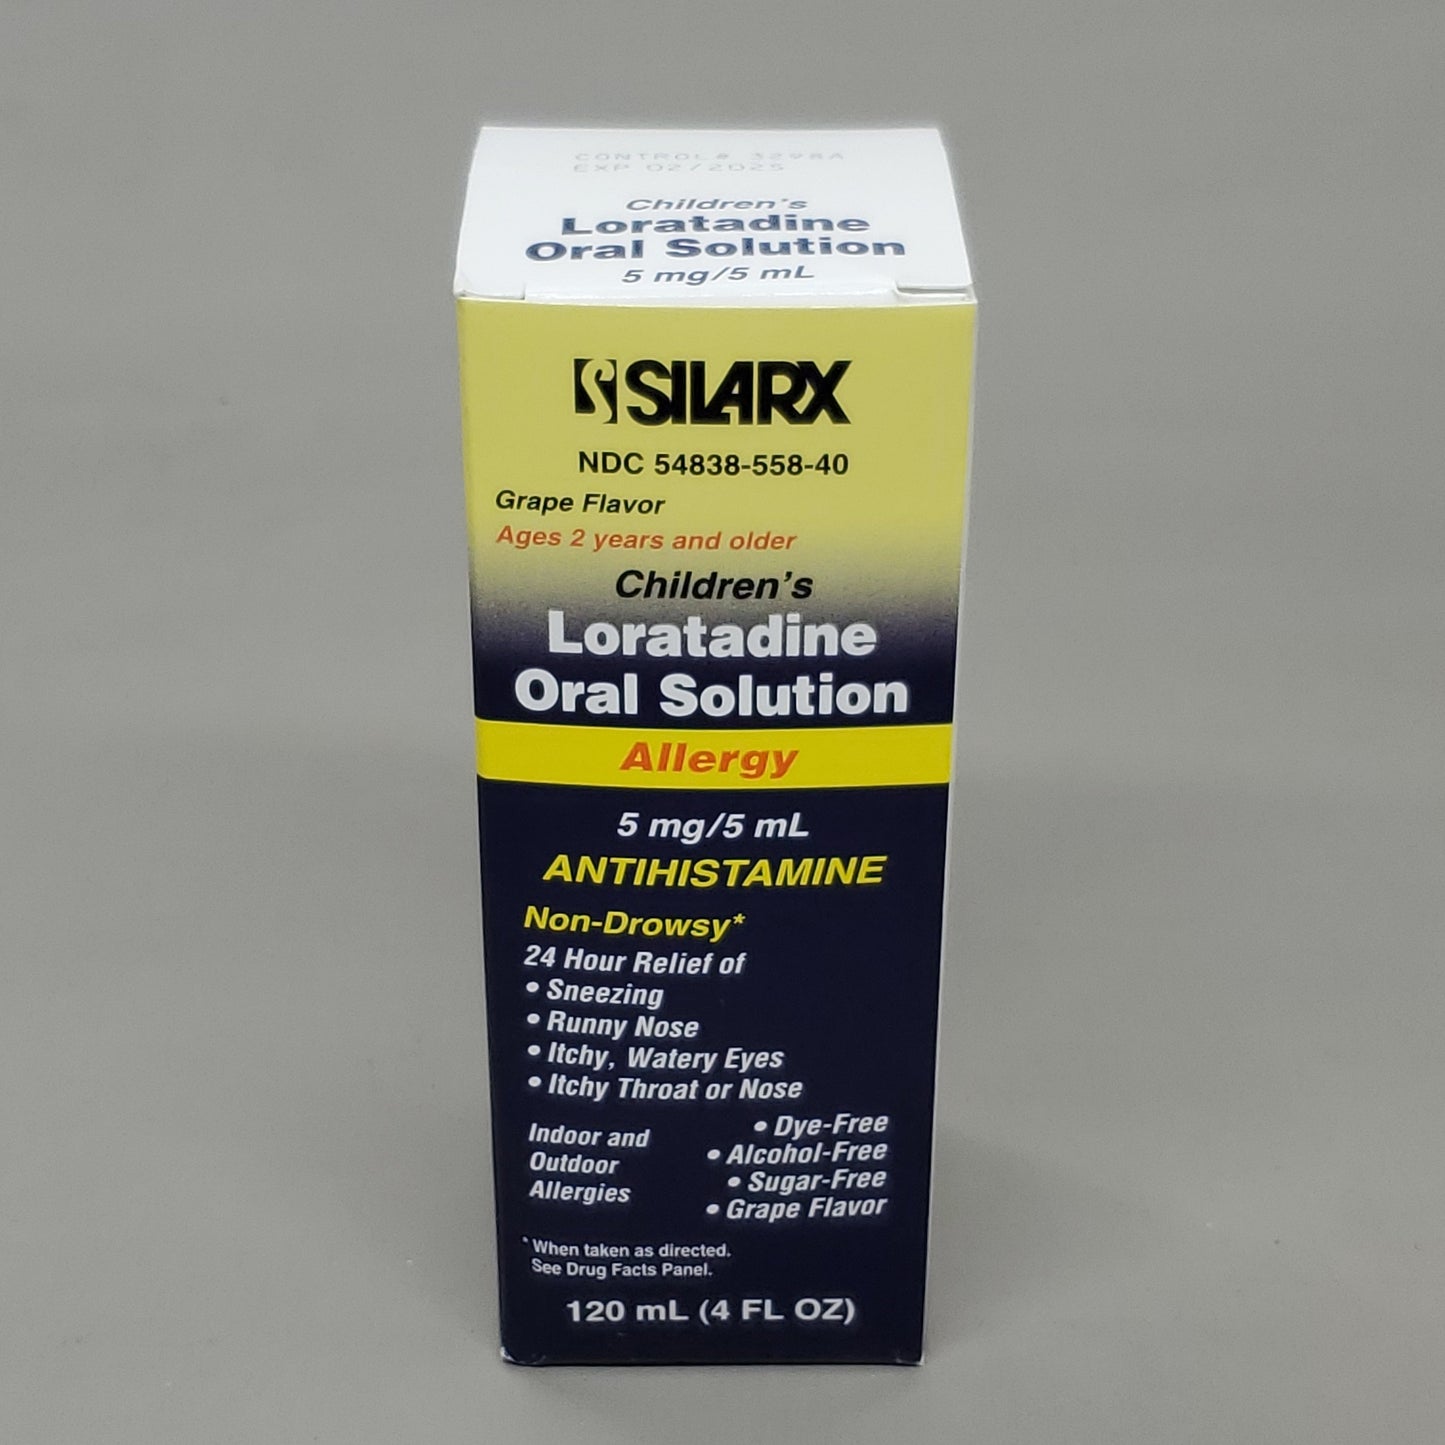 SILARX 3 Pack Of Children's Loratadine Oral Solution Non-Drowsy 24HR Allergy Relief 02/25